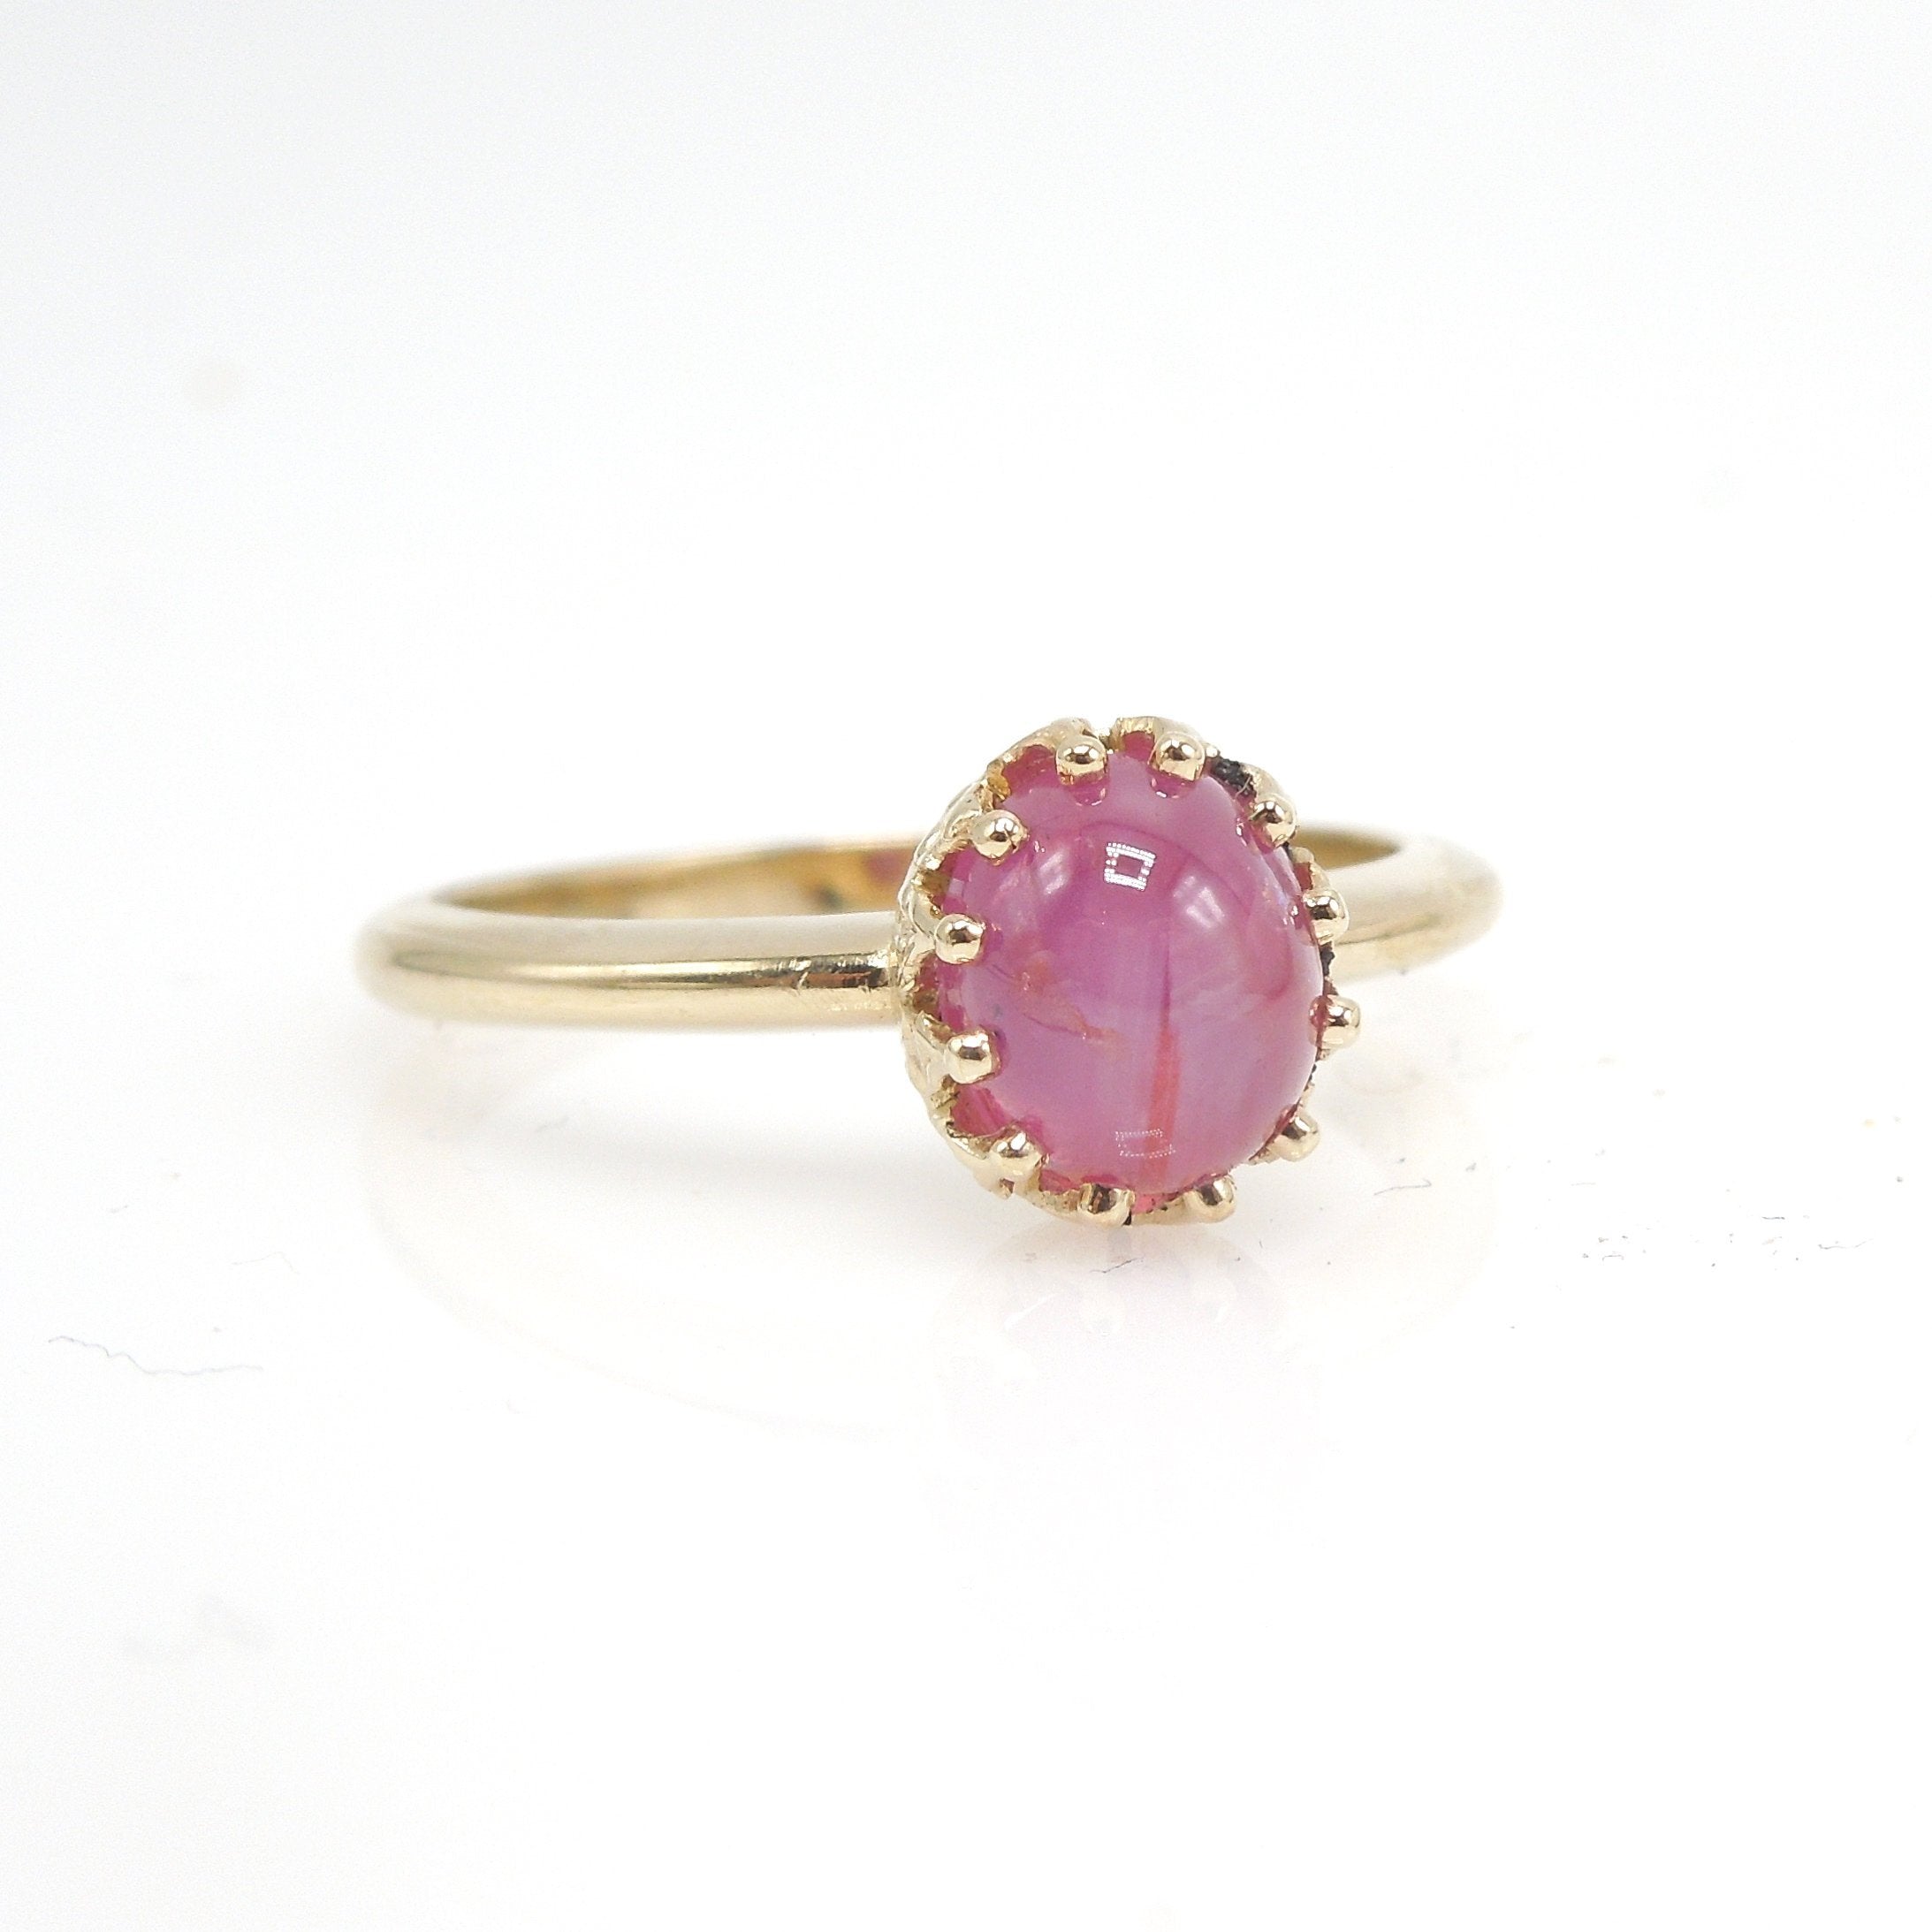 2.46ct Cabochon Pink-Red Star Sapphire in 14K Yellow Gold